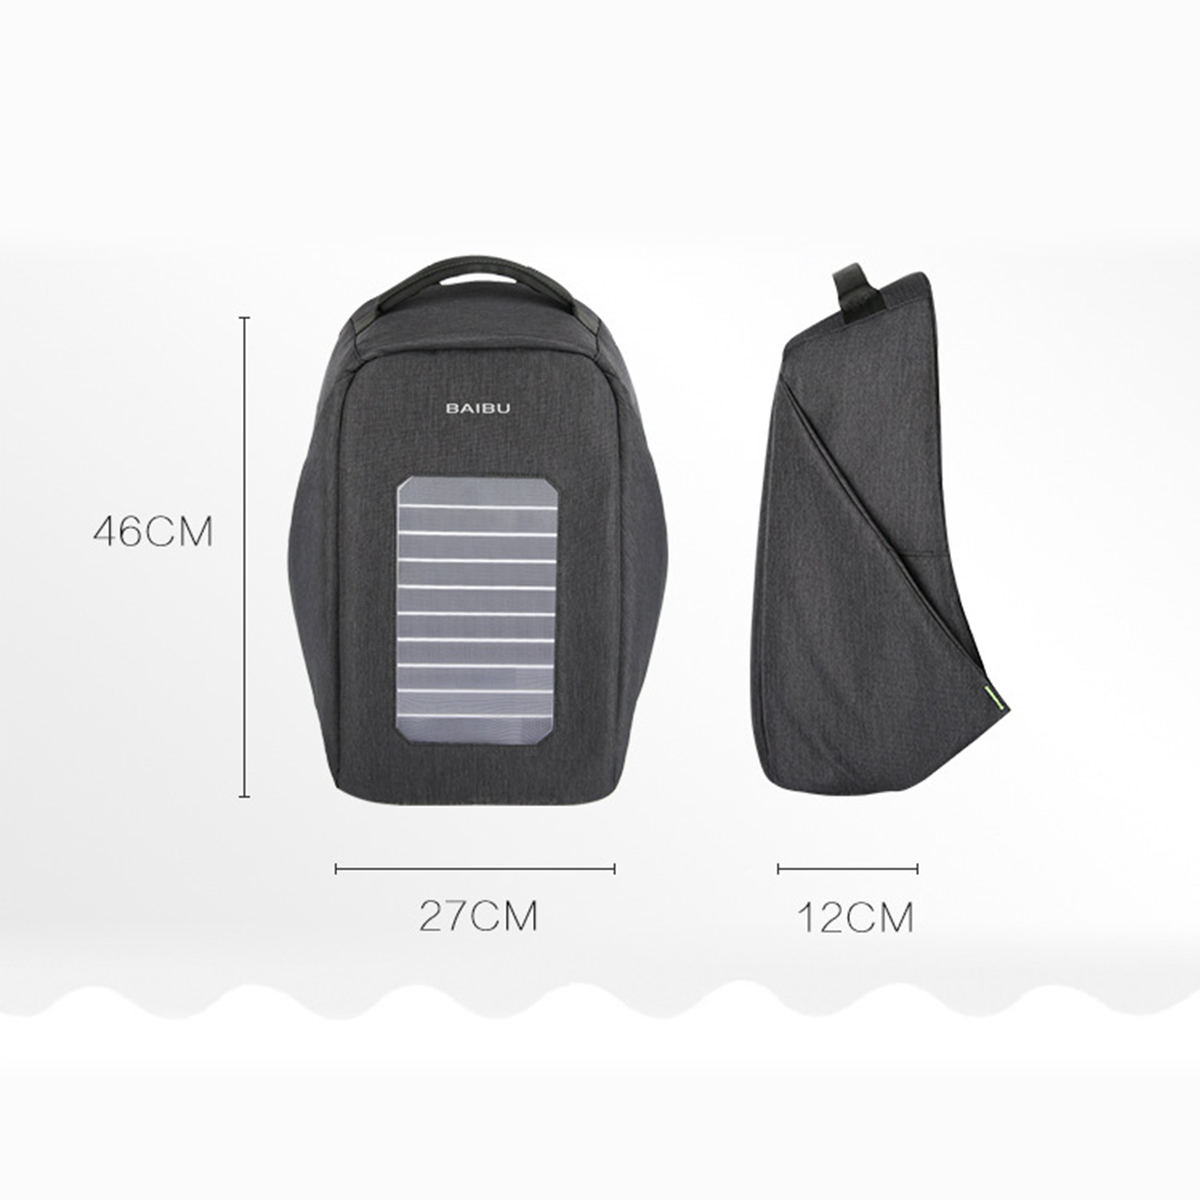 16-inch-Waterproof-Solar-Panel-Backpack-Laptop-USB-Charger-Outdoor-Travel-Camping-Bags-1244084-2